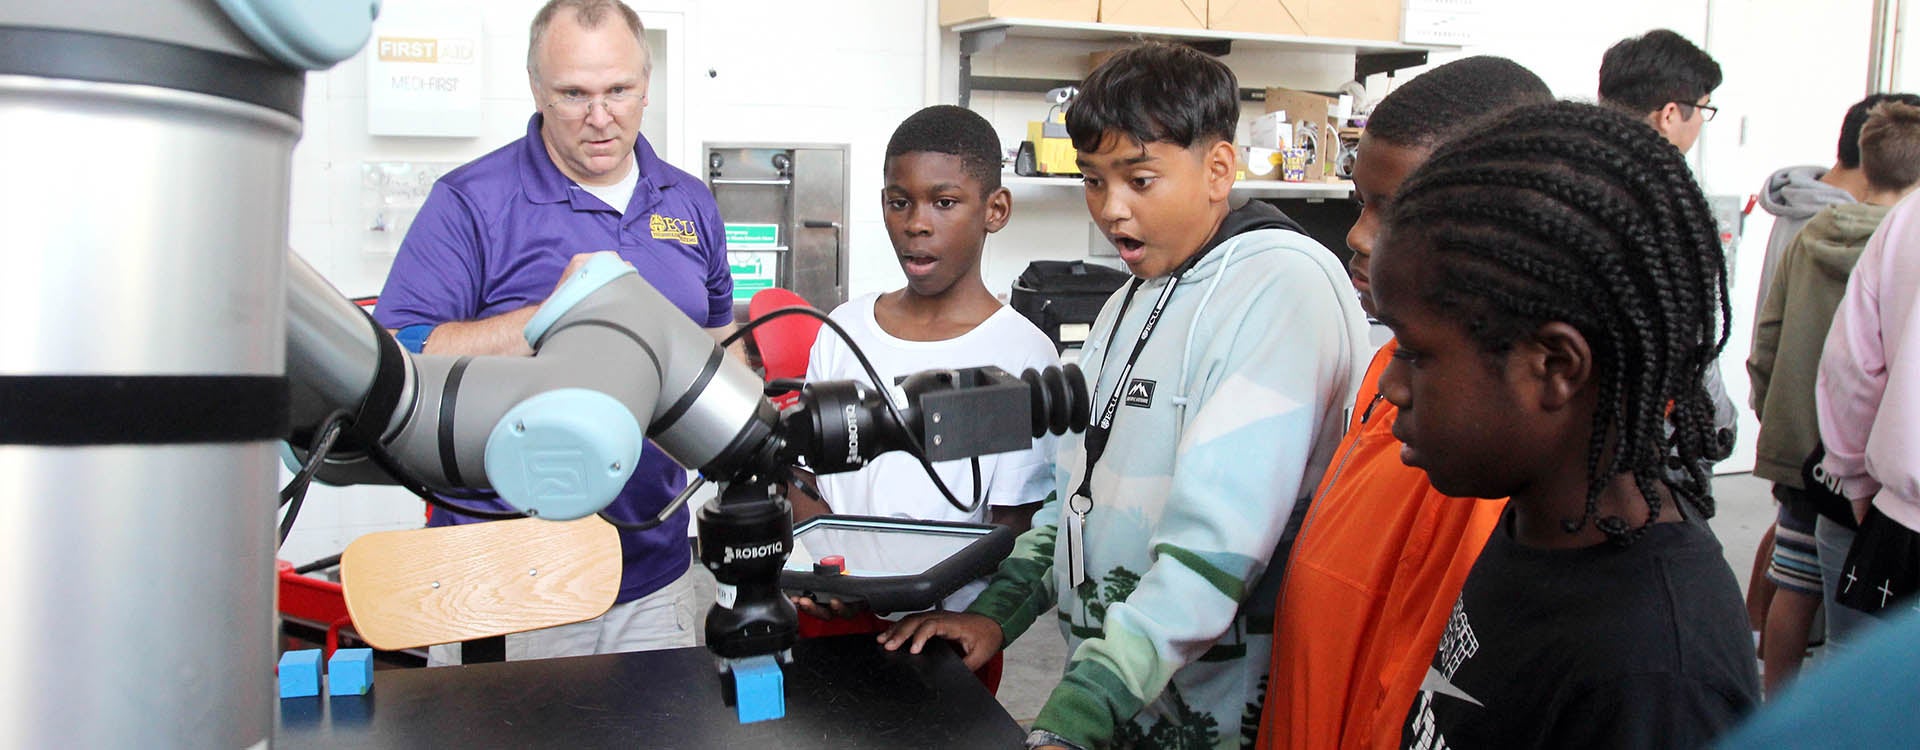 Students react as they operate a cobot to lift a block during the STEMx youth camp in the Science and Technology Building. ECU's Department of Technology Systems received a grant for the camp that is designed to create interest in technology among youth. (Photos by Ken Buday)